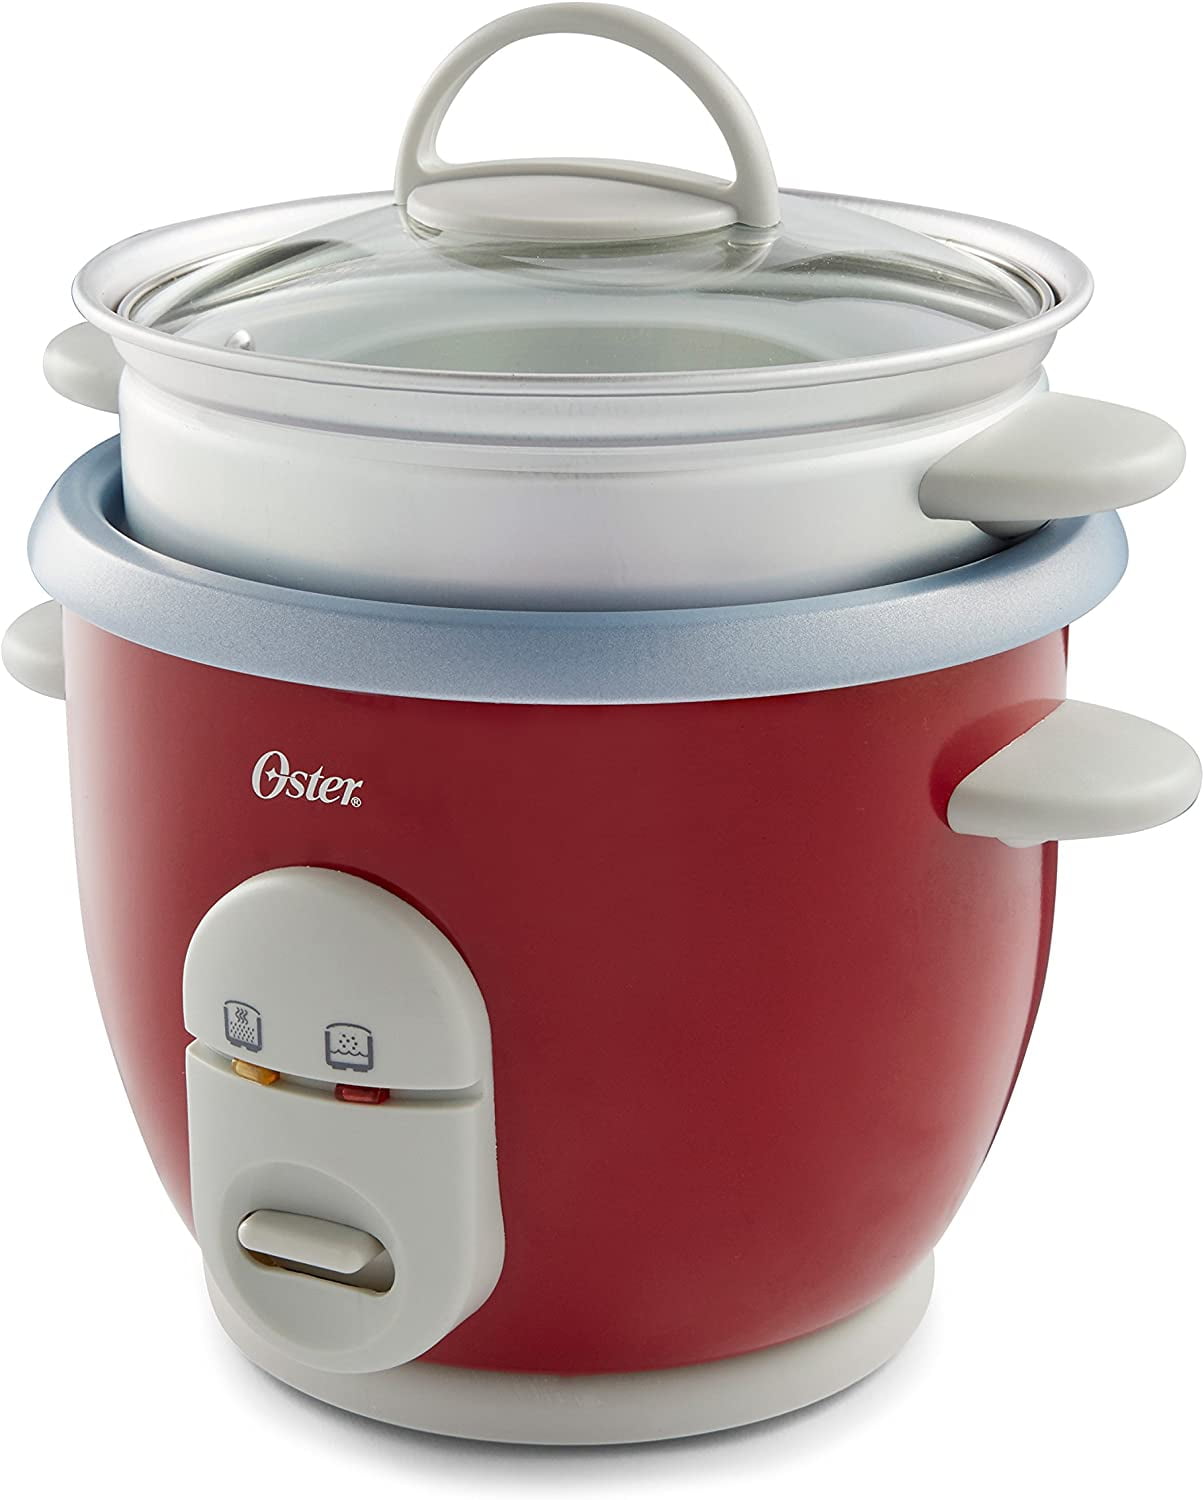 OSTER CKSTRCMS14-R-NP Red 14 Cup Rice Cooker 